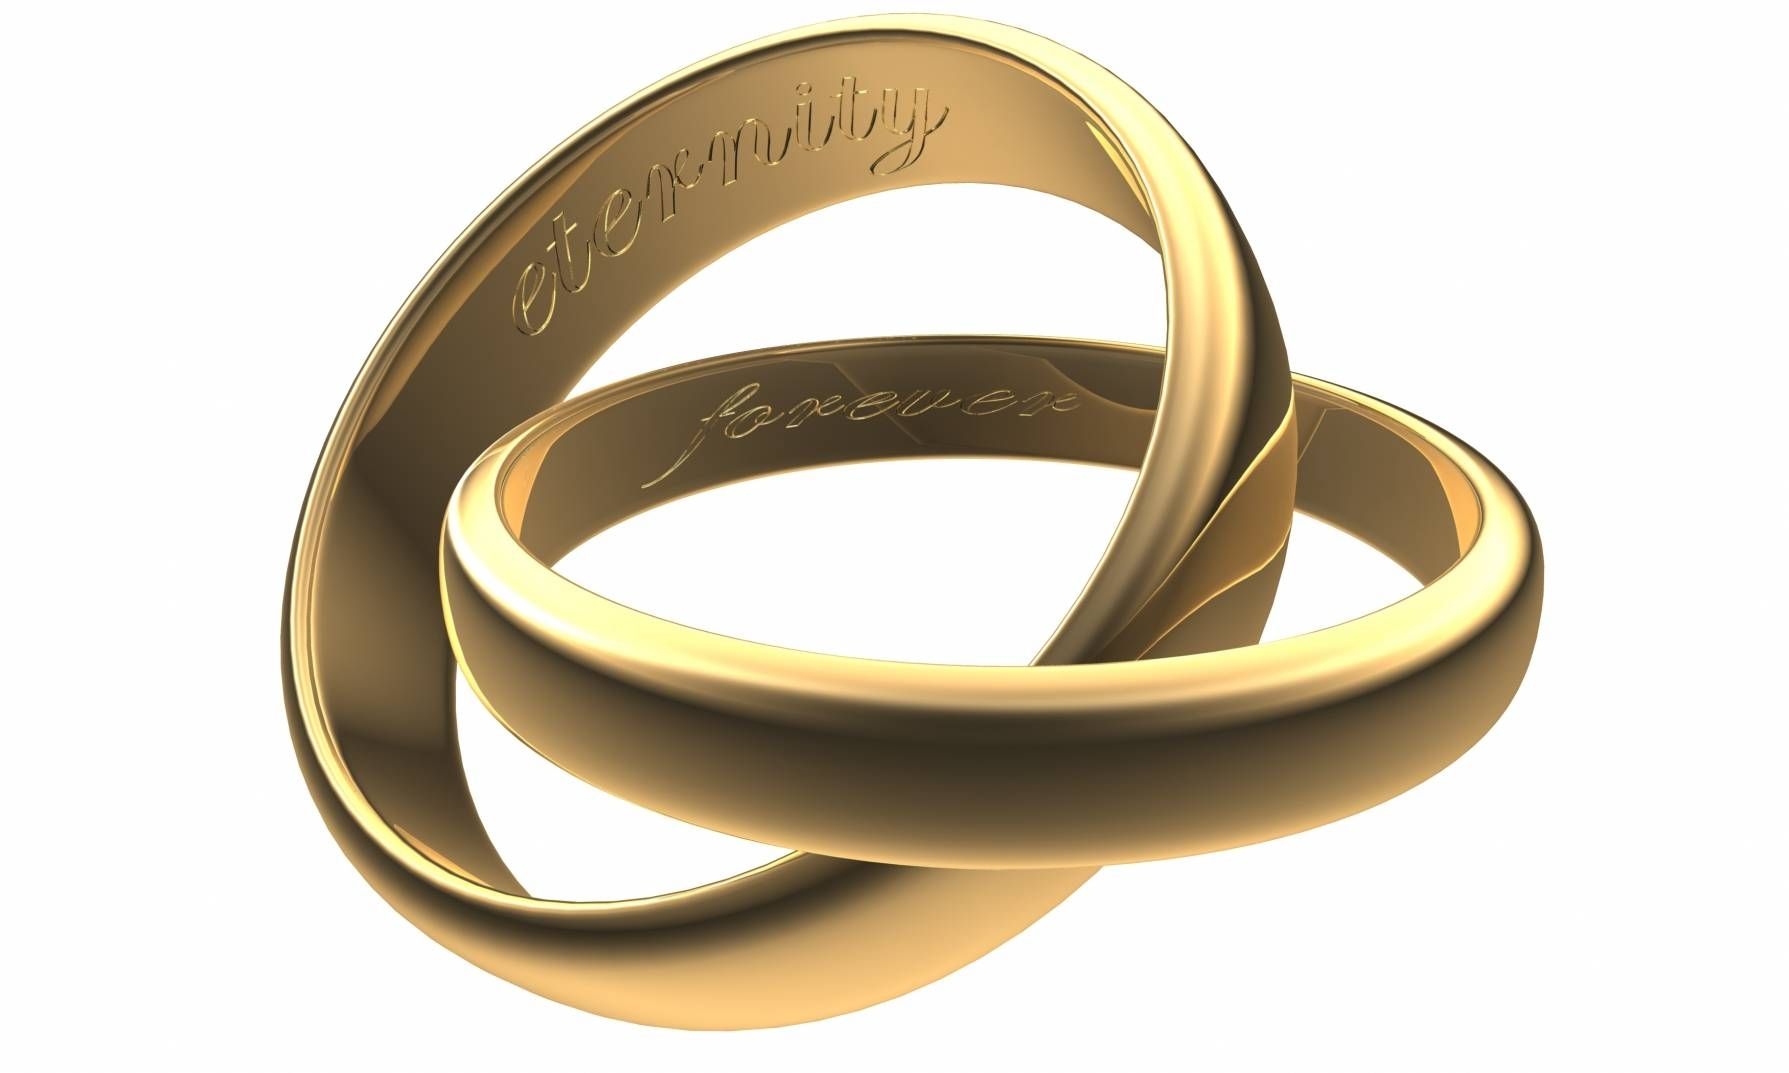 Engraved Wedding Bands | Wedding Band Engraving Inside Customized Wedding Bands (View 7 of 15)